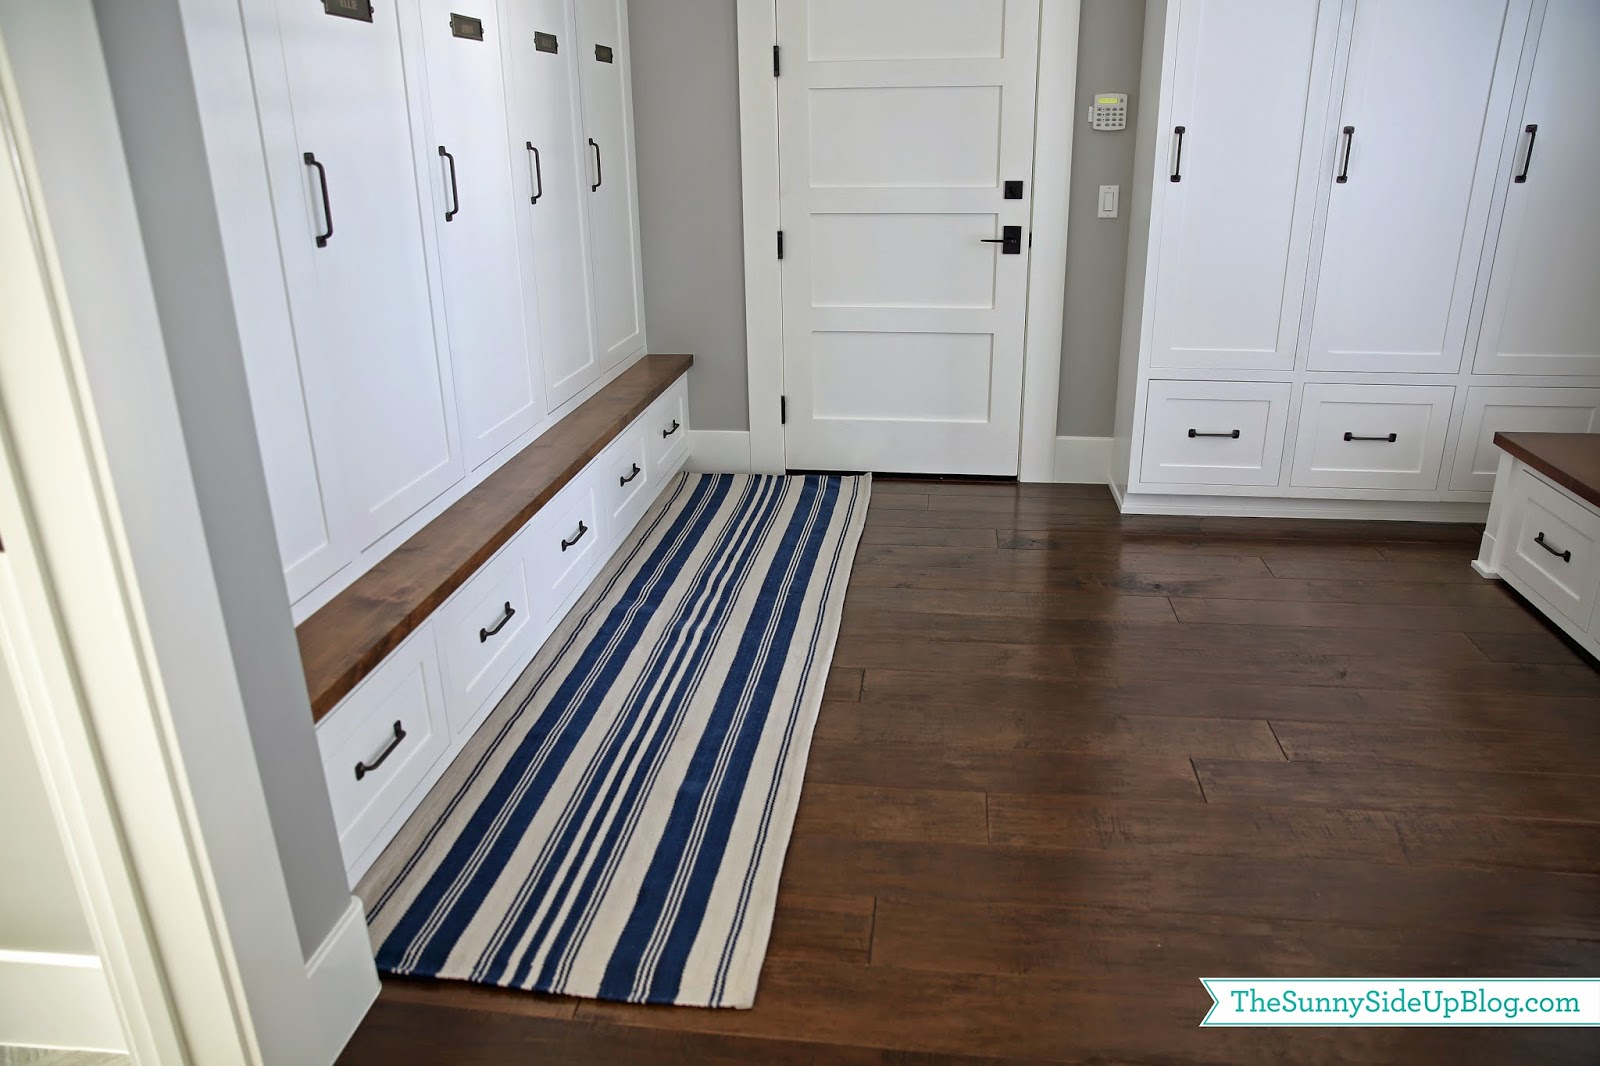 Mudroom rug (attempt #1) - The Sunny Side Up Blog